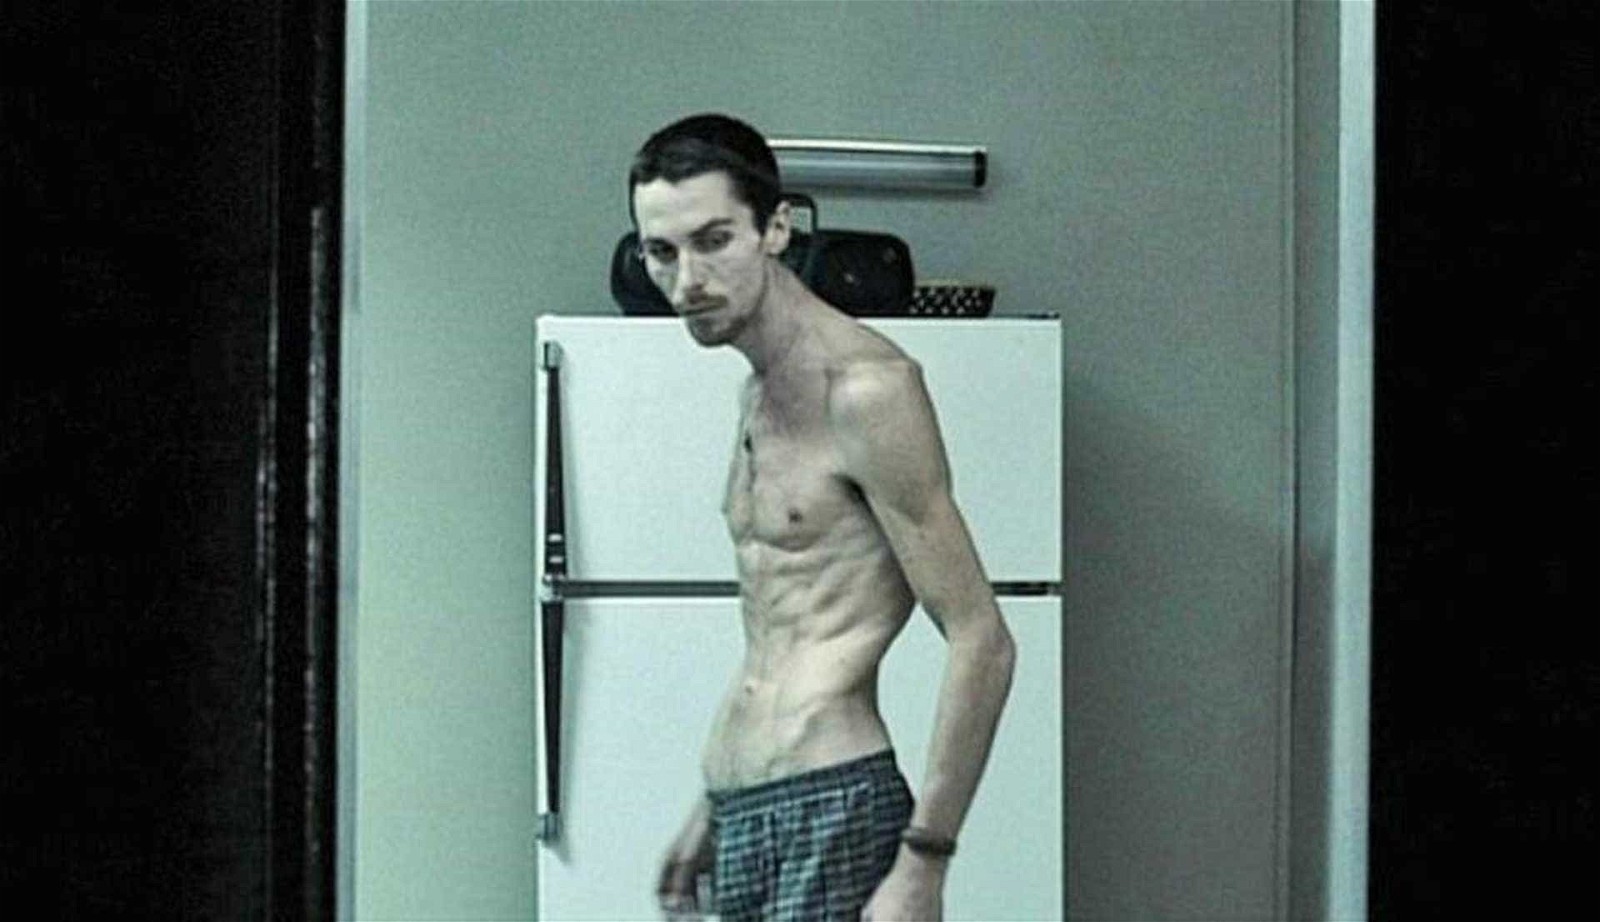 Christian Bale in The Machinist